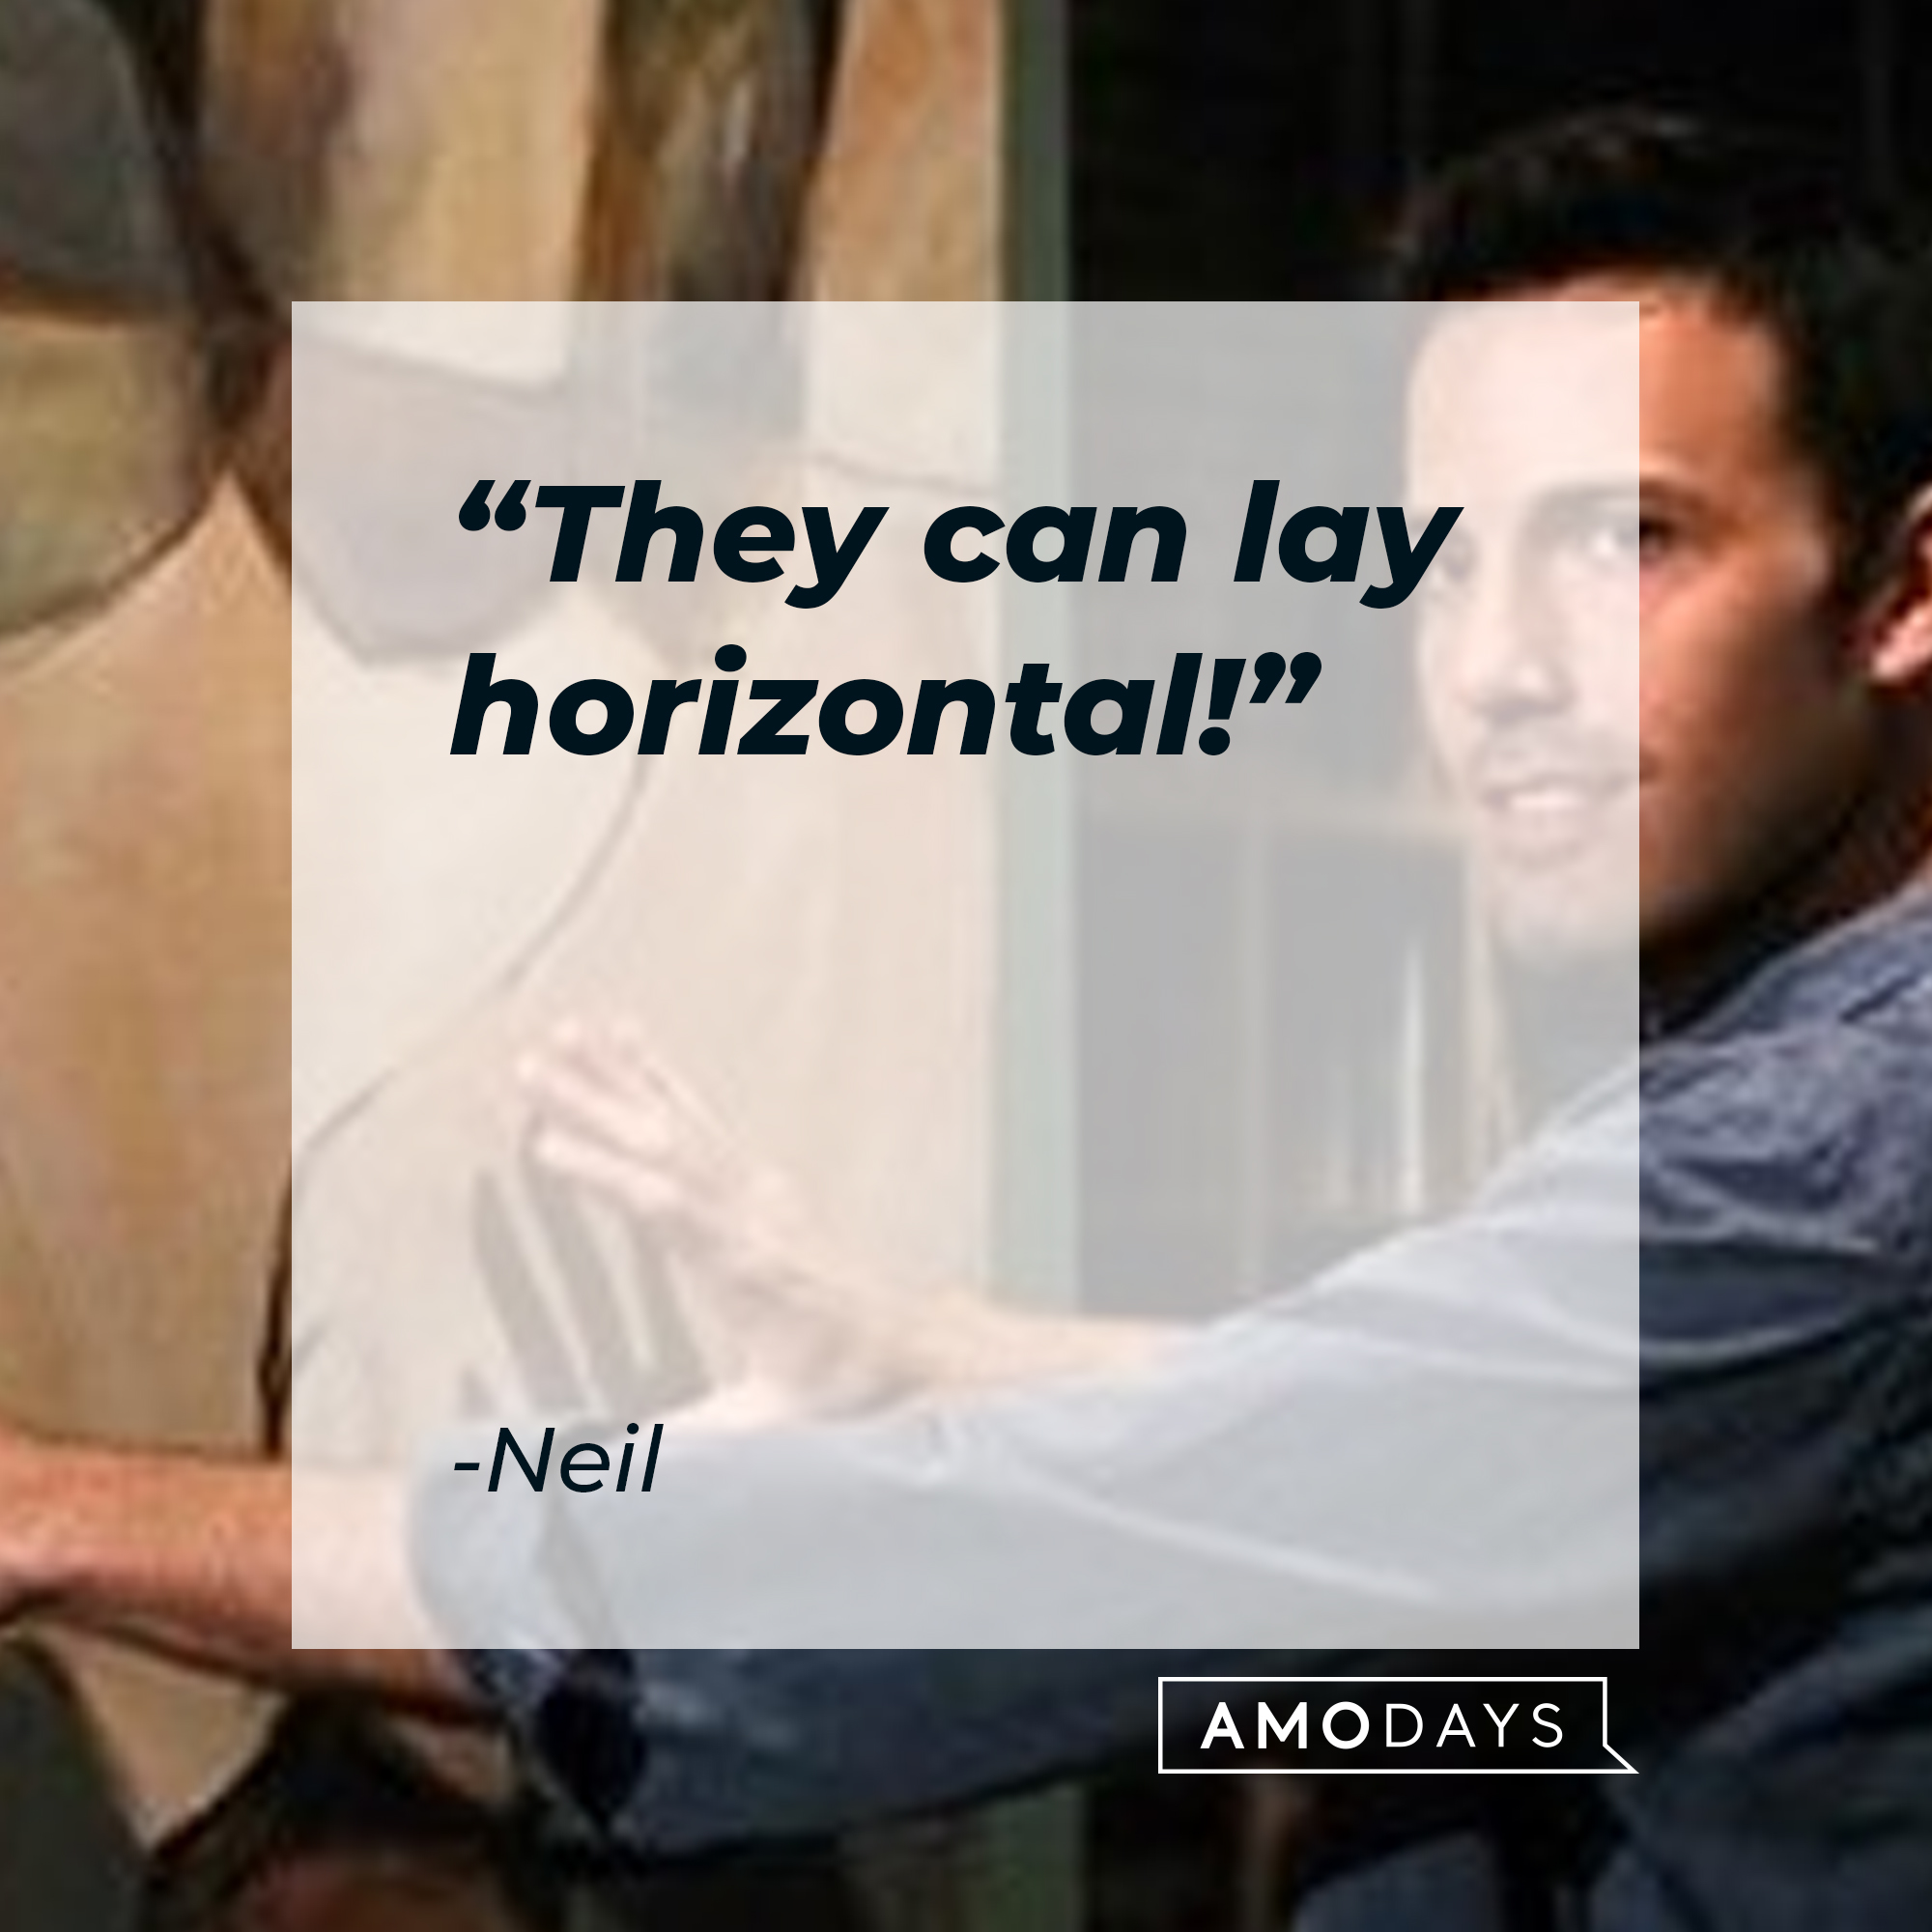 Neil's quote: "They can lay horizontal!" | Source: Source: Facebook/hesjustnotthatintoyou